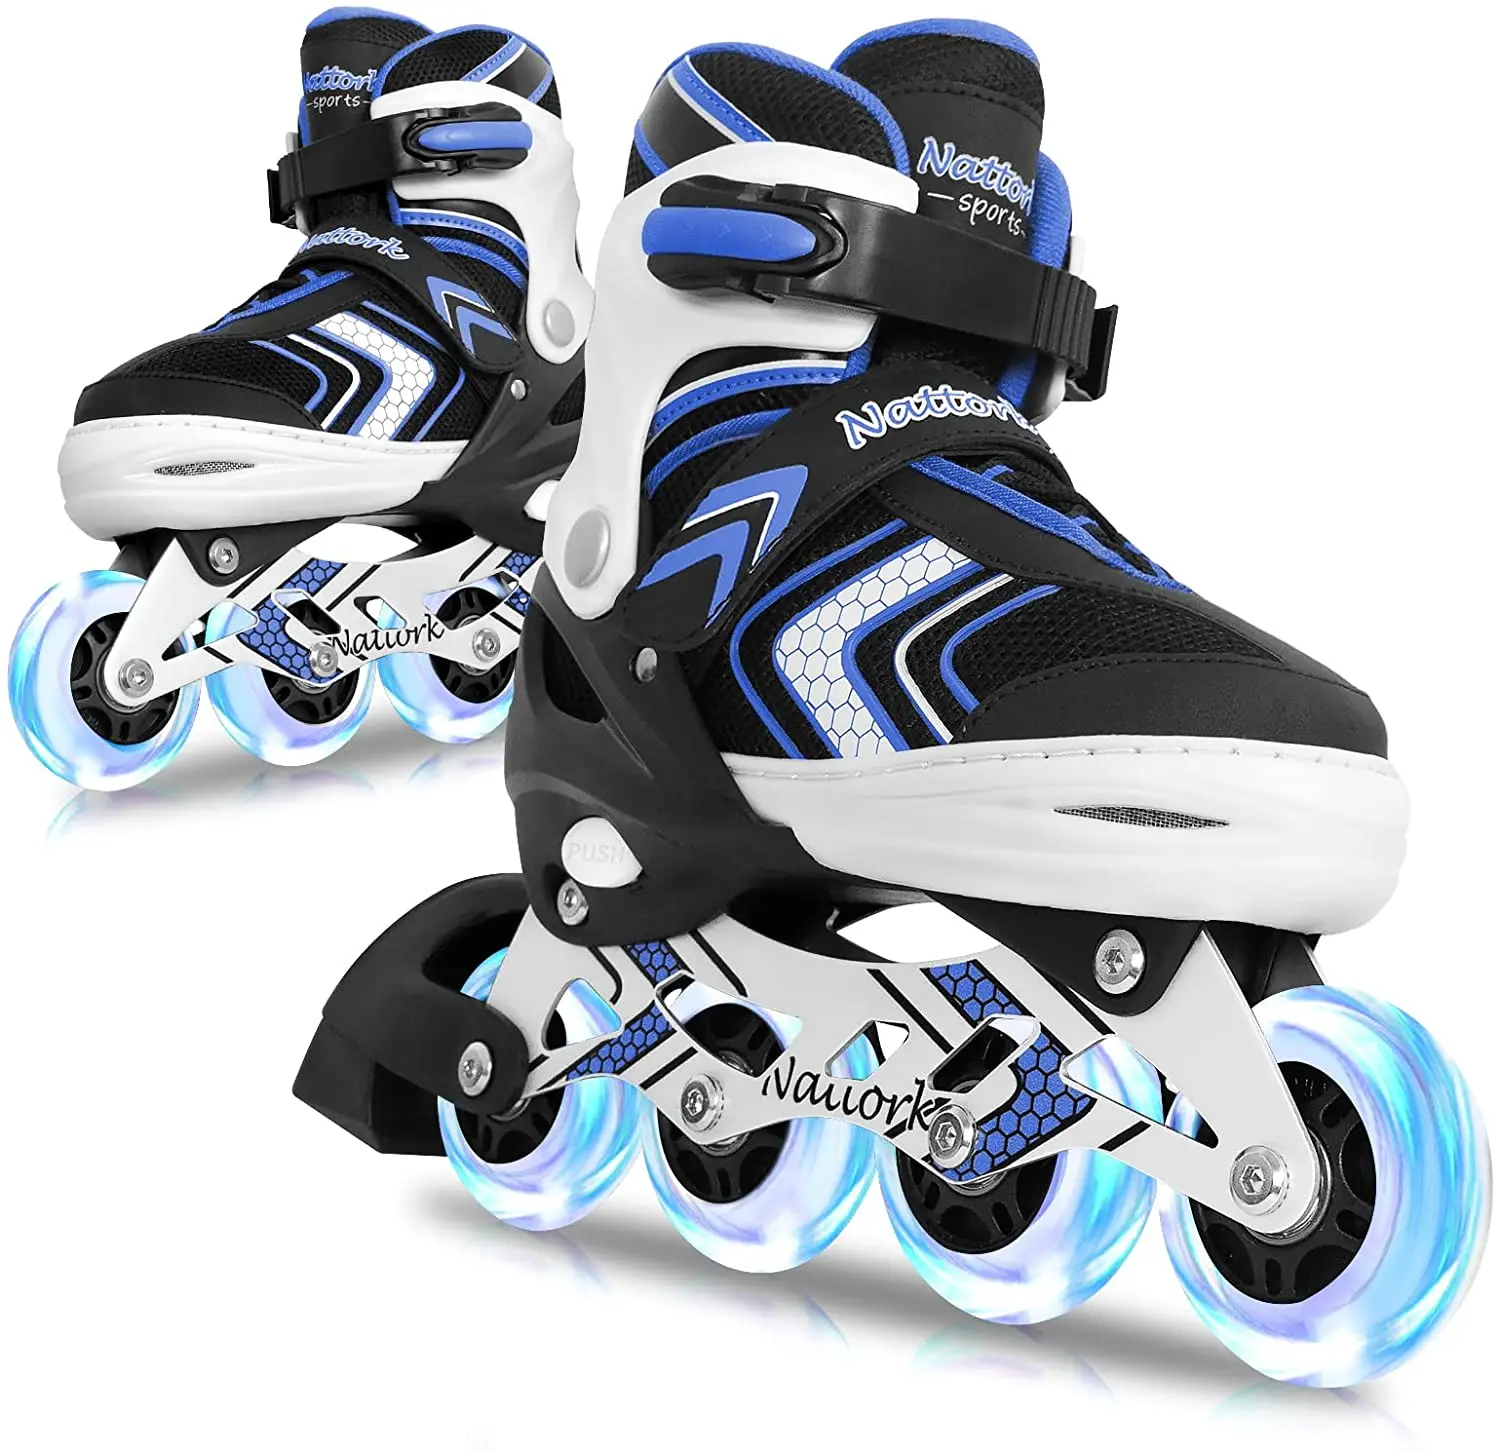 

Nattork Adjustable Inline Skates for Kids and Youth with Full Light Up Wheels,Fun Illuminating Beginner for Girls, Boys